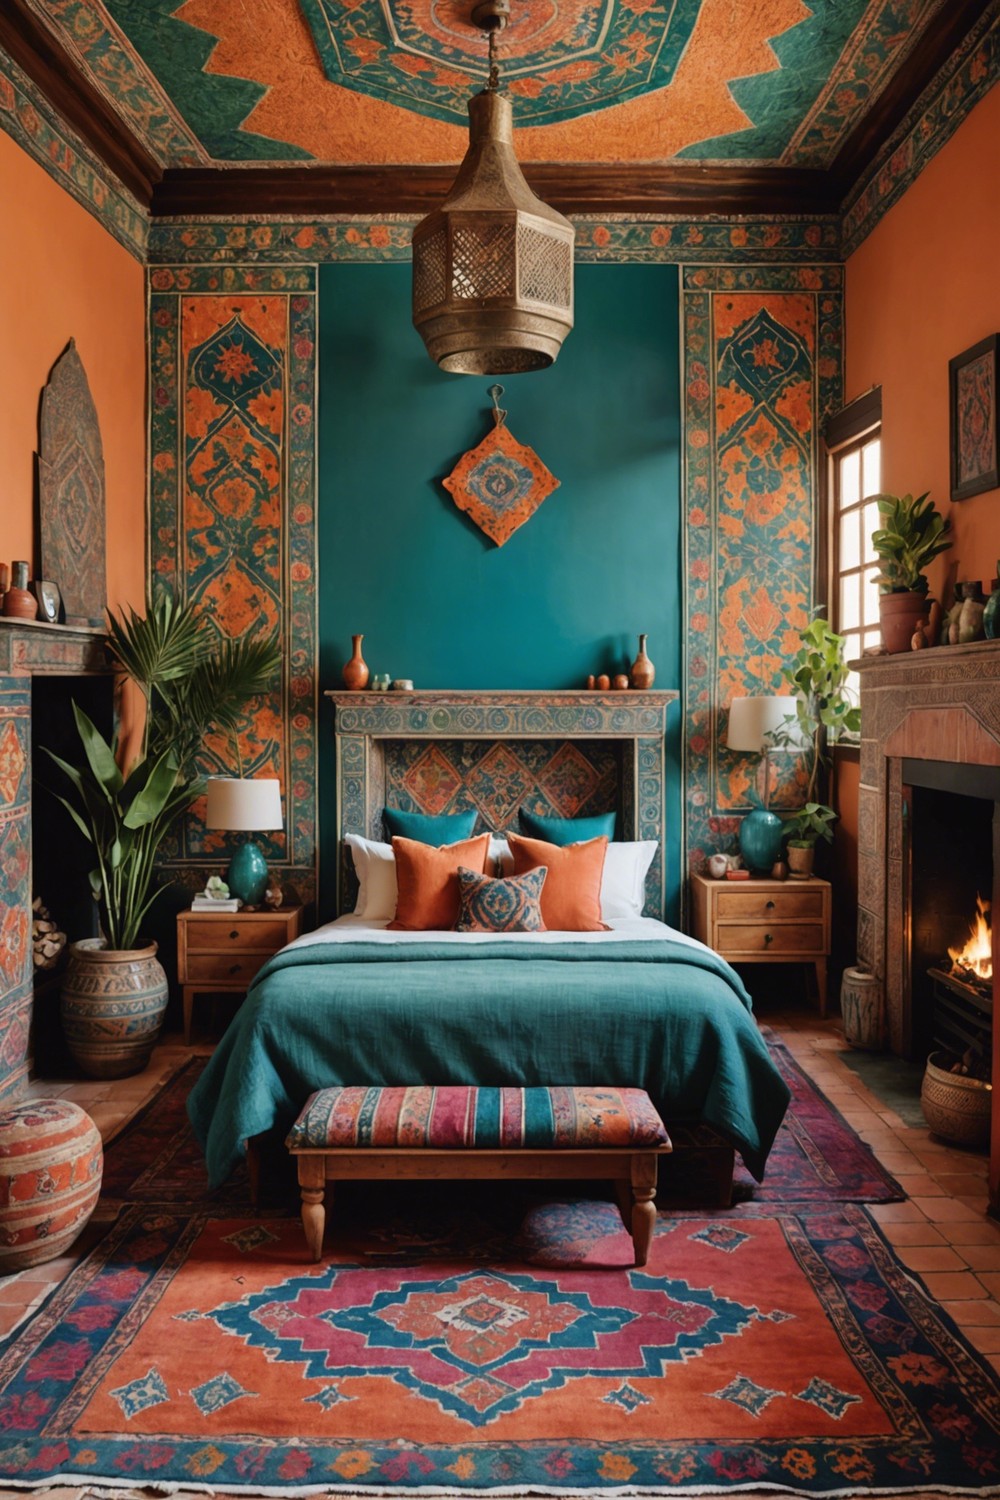 Fireplace-centric with Moroccan Tiles: